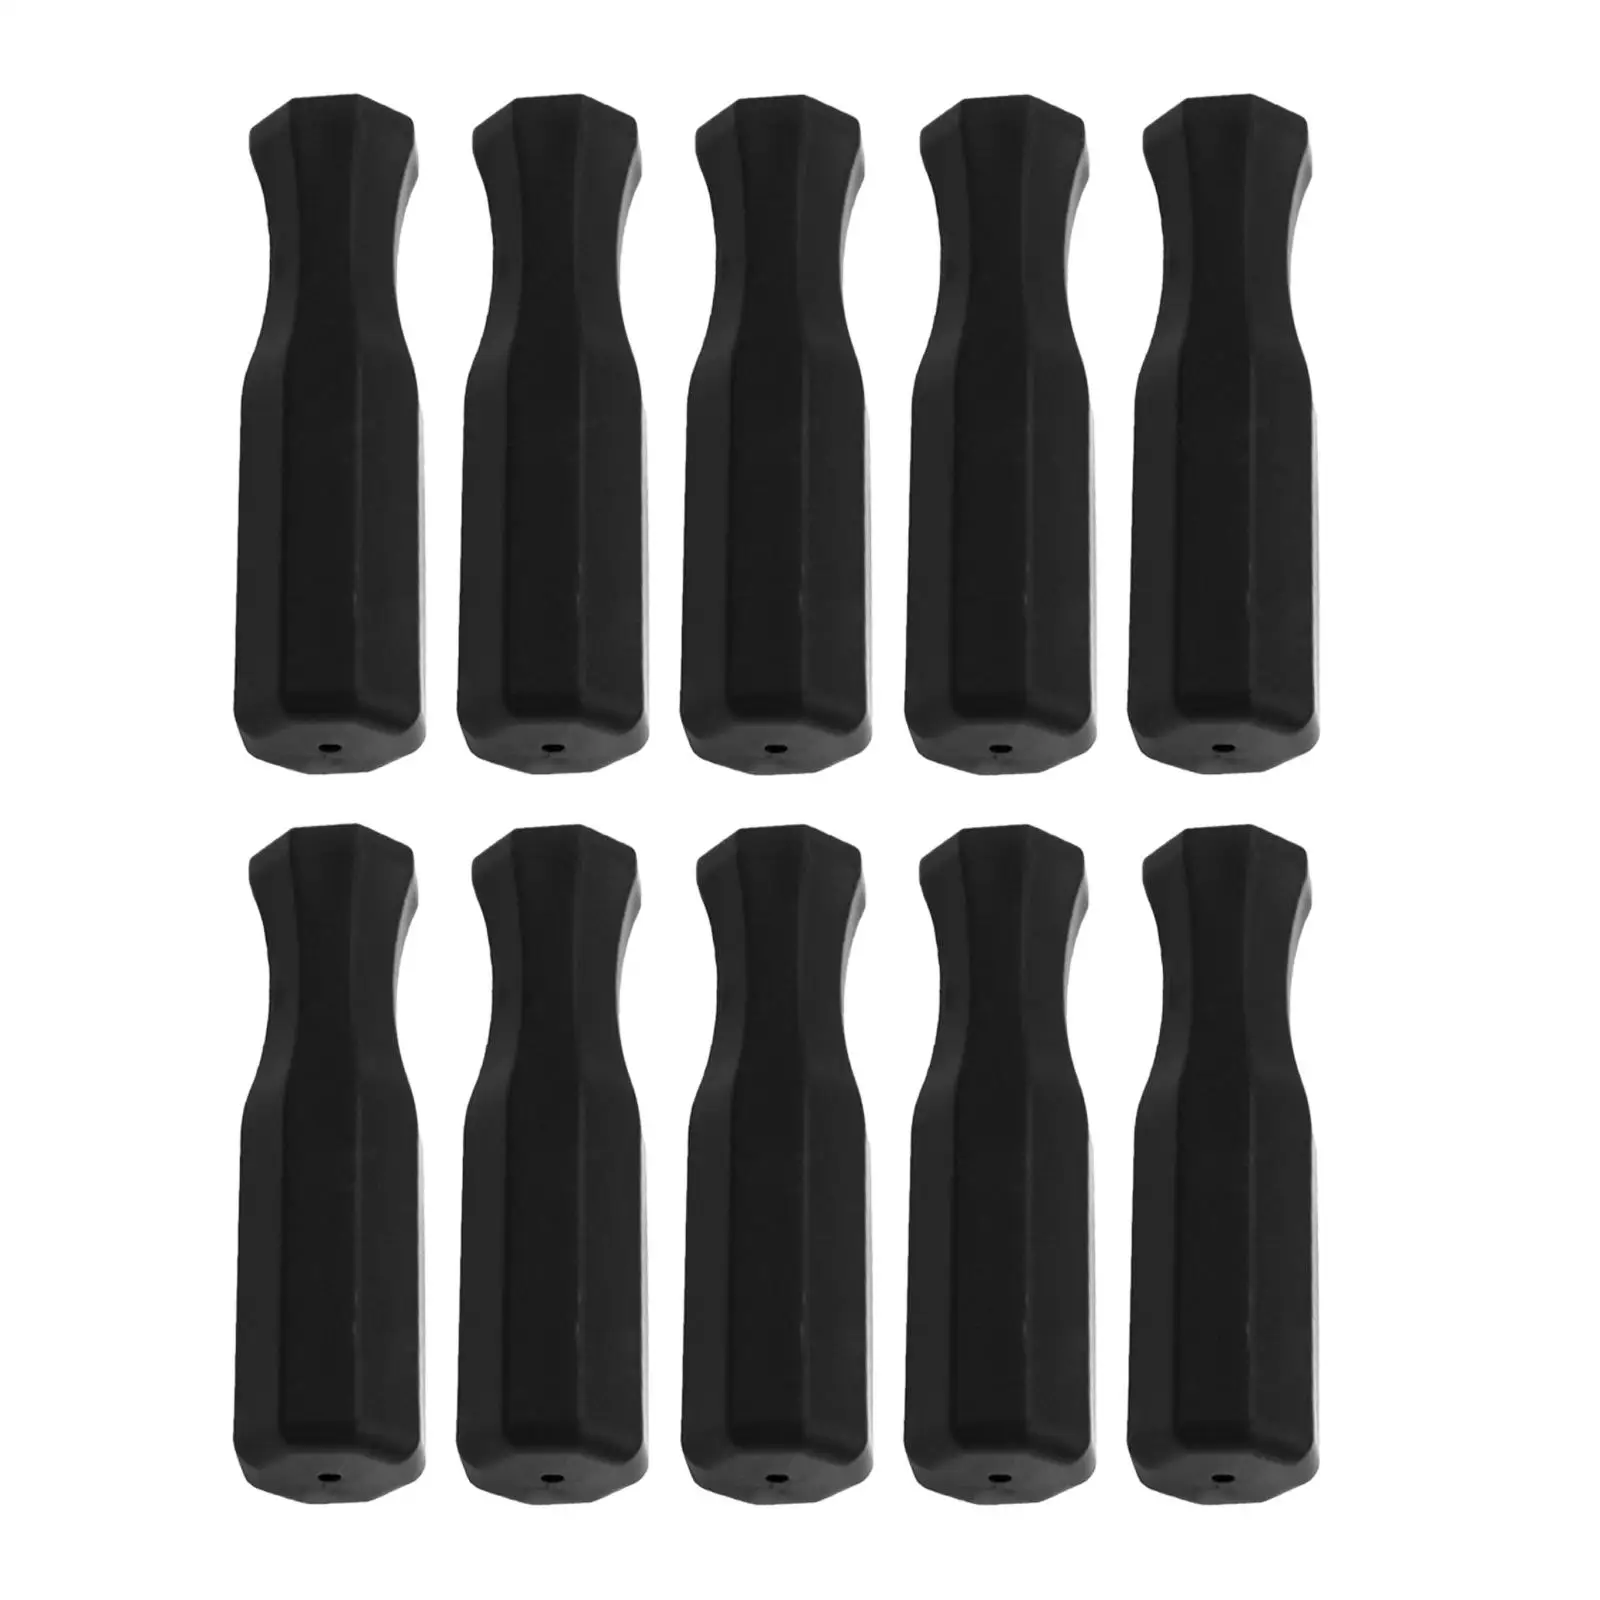 10pcs Table Soccer Parts Replacement Kids Children Football Handle Grip Tabletop